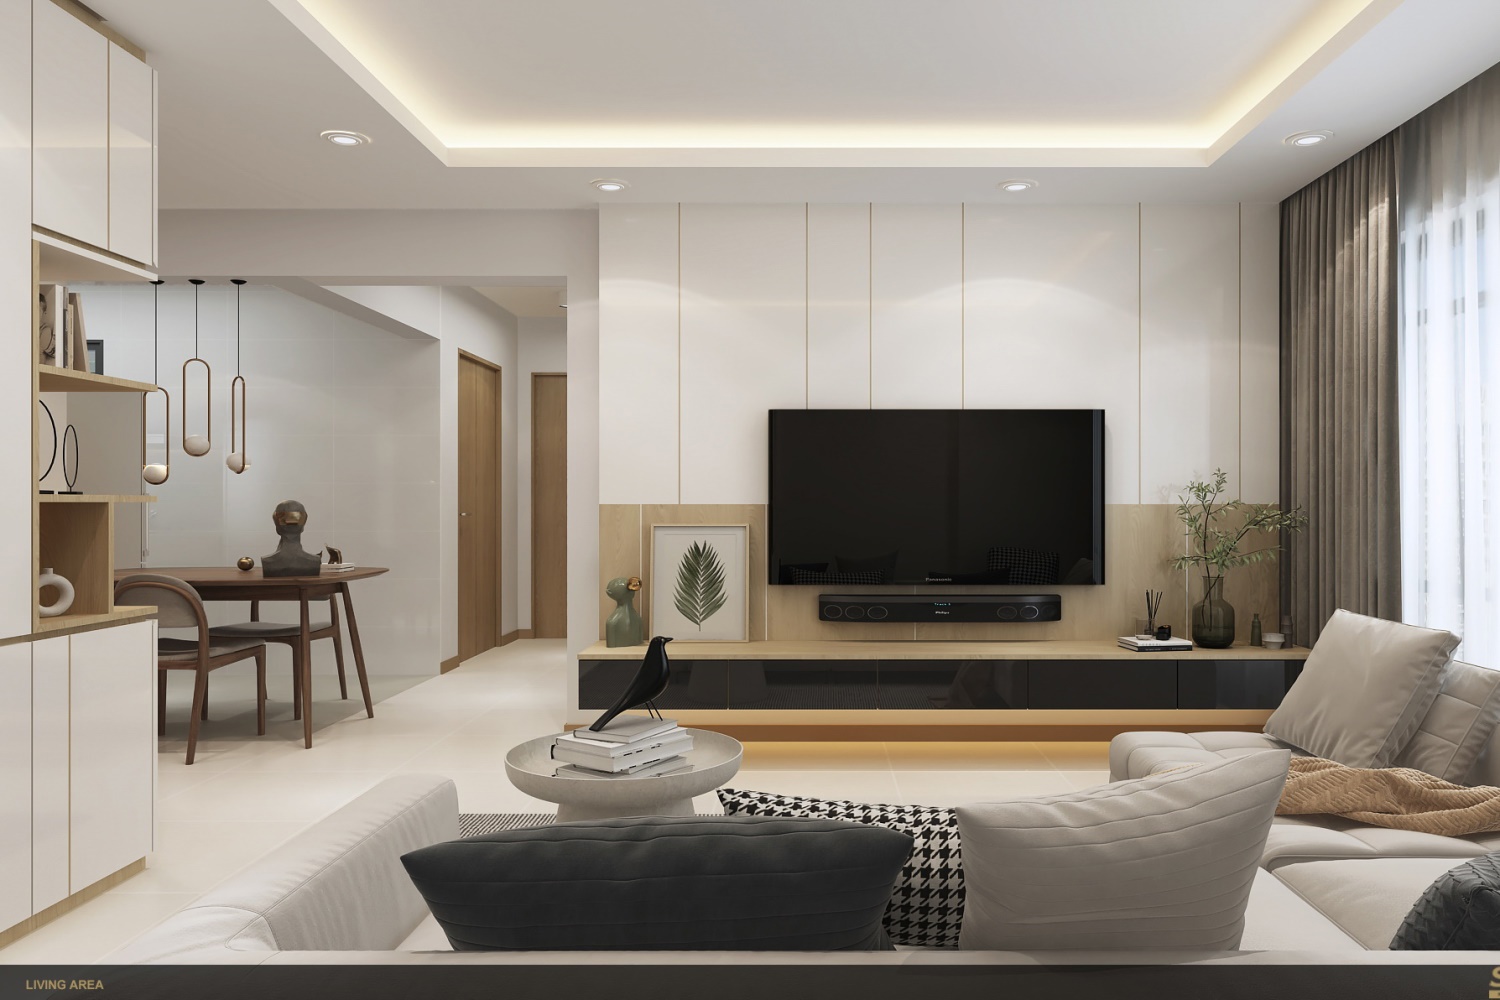 Tampines Green Verge - 754sqft by Sky Creation Asia Pte Ltd. Unit is HDB and follows a Scandinavian style.